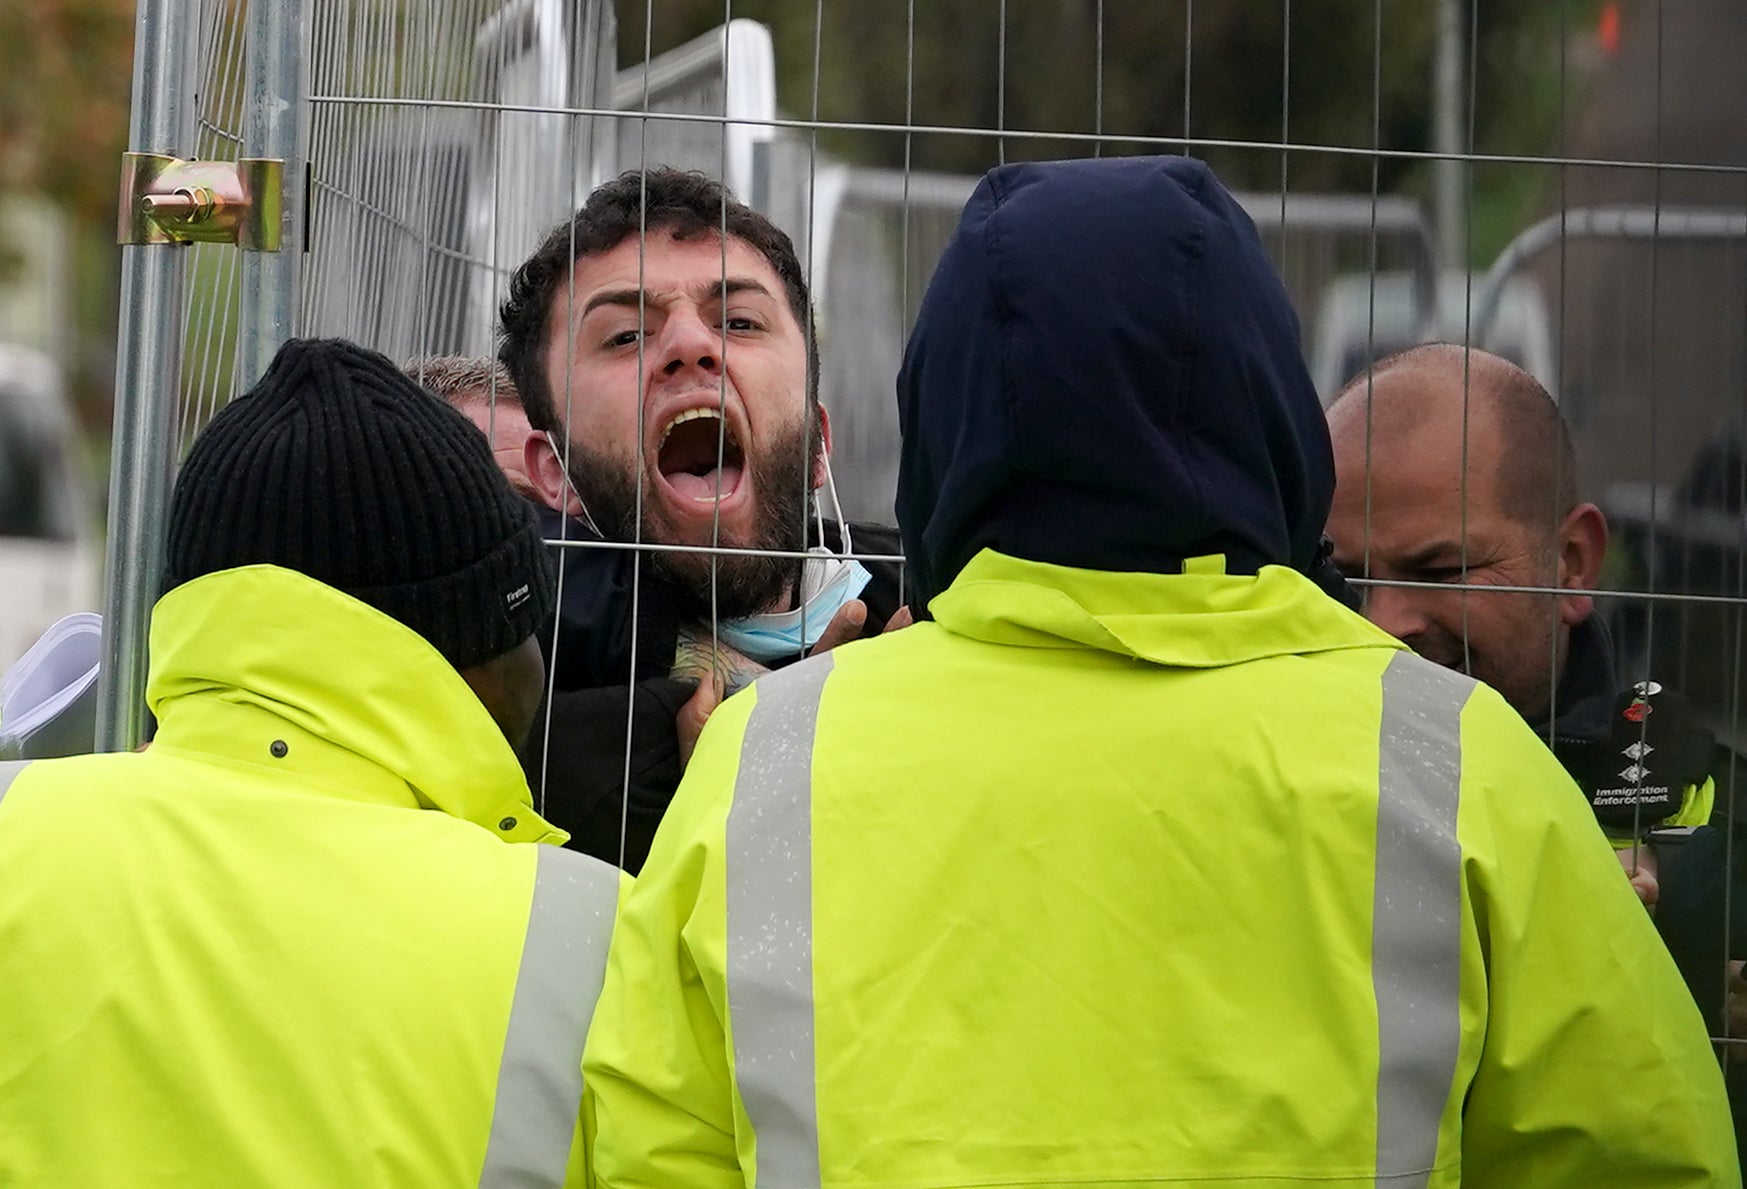 A Manston migrant attempting to communicate with journalists is pinned against a fence by members of staff, before being taken out of view